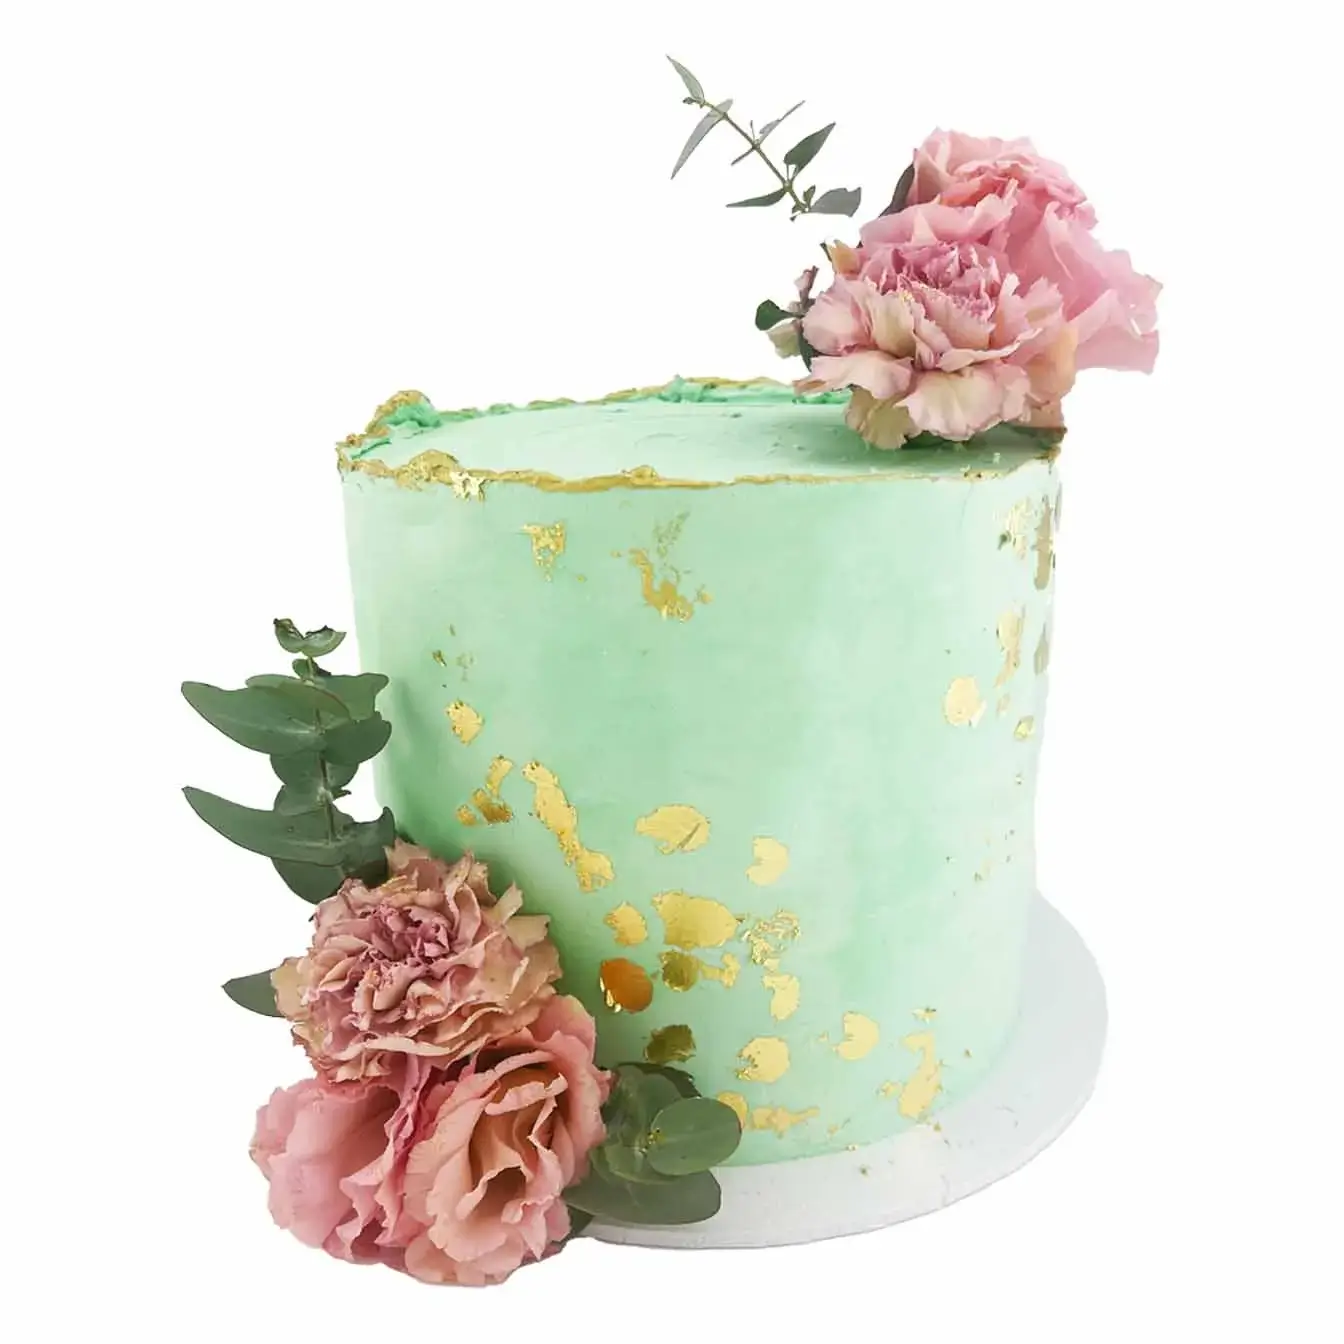 Pastel Rustic Cake with Gold Accents and Fresh Flowers